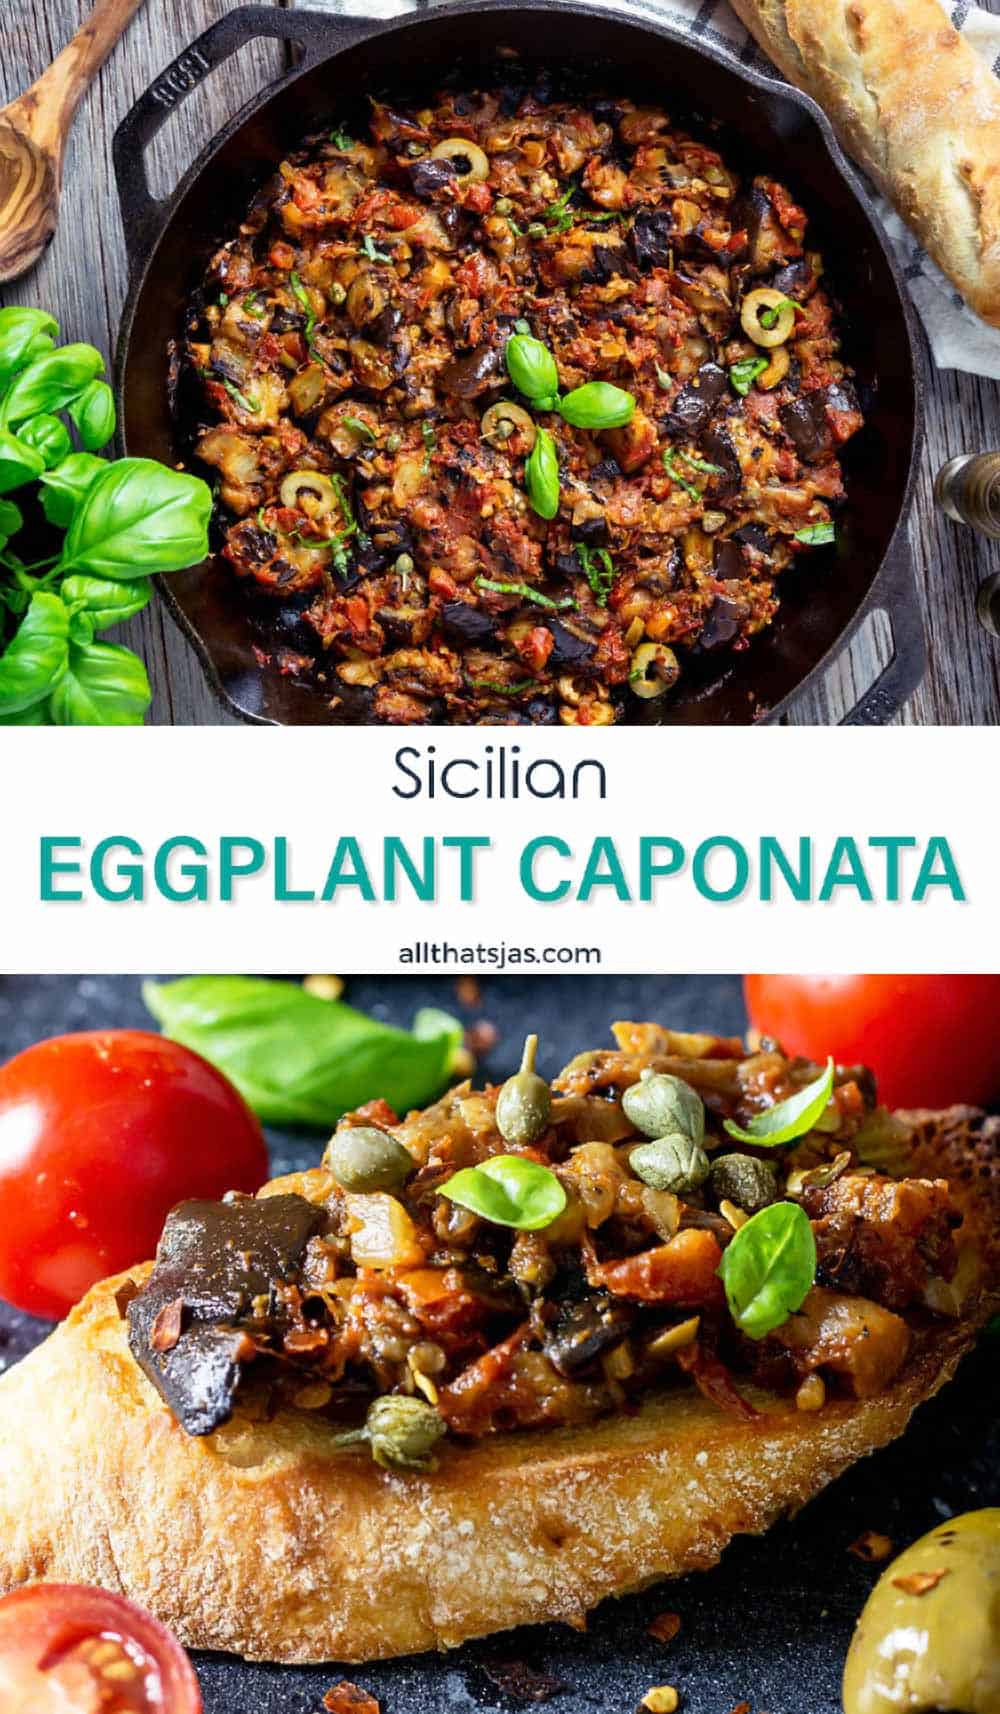 Two-photo image of eggplant, tomato, olives, and capers caponata with text overlay in the middle.